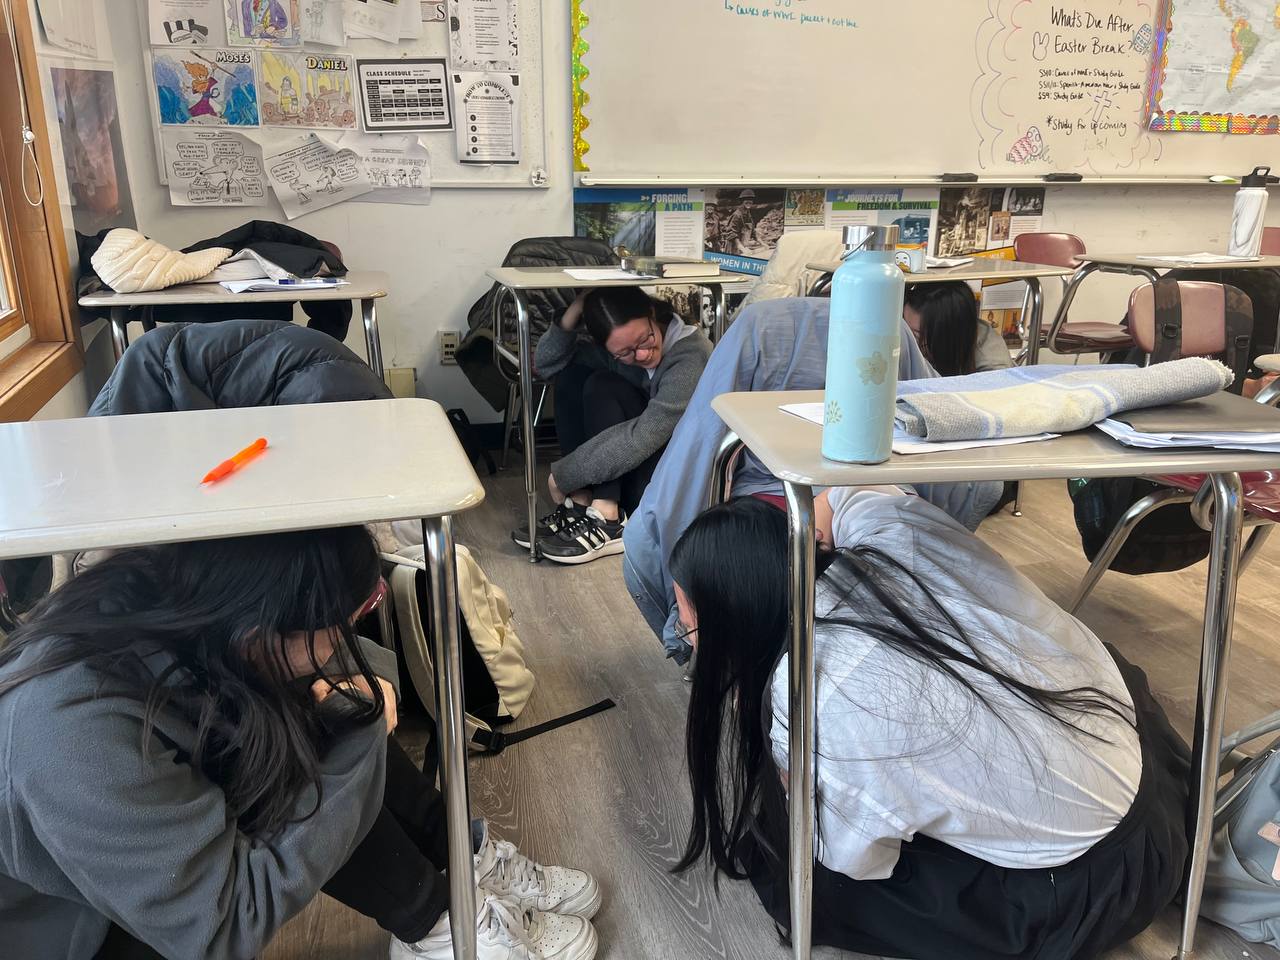 Successful Earthquake Drill Conducted at Local Middle and High School